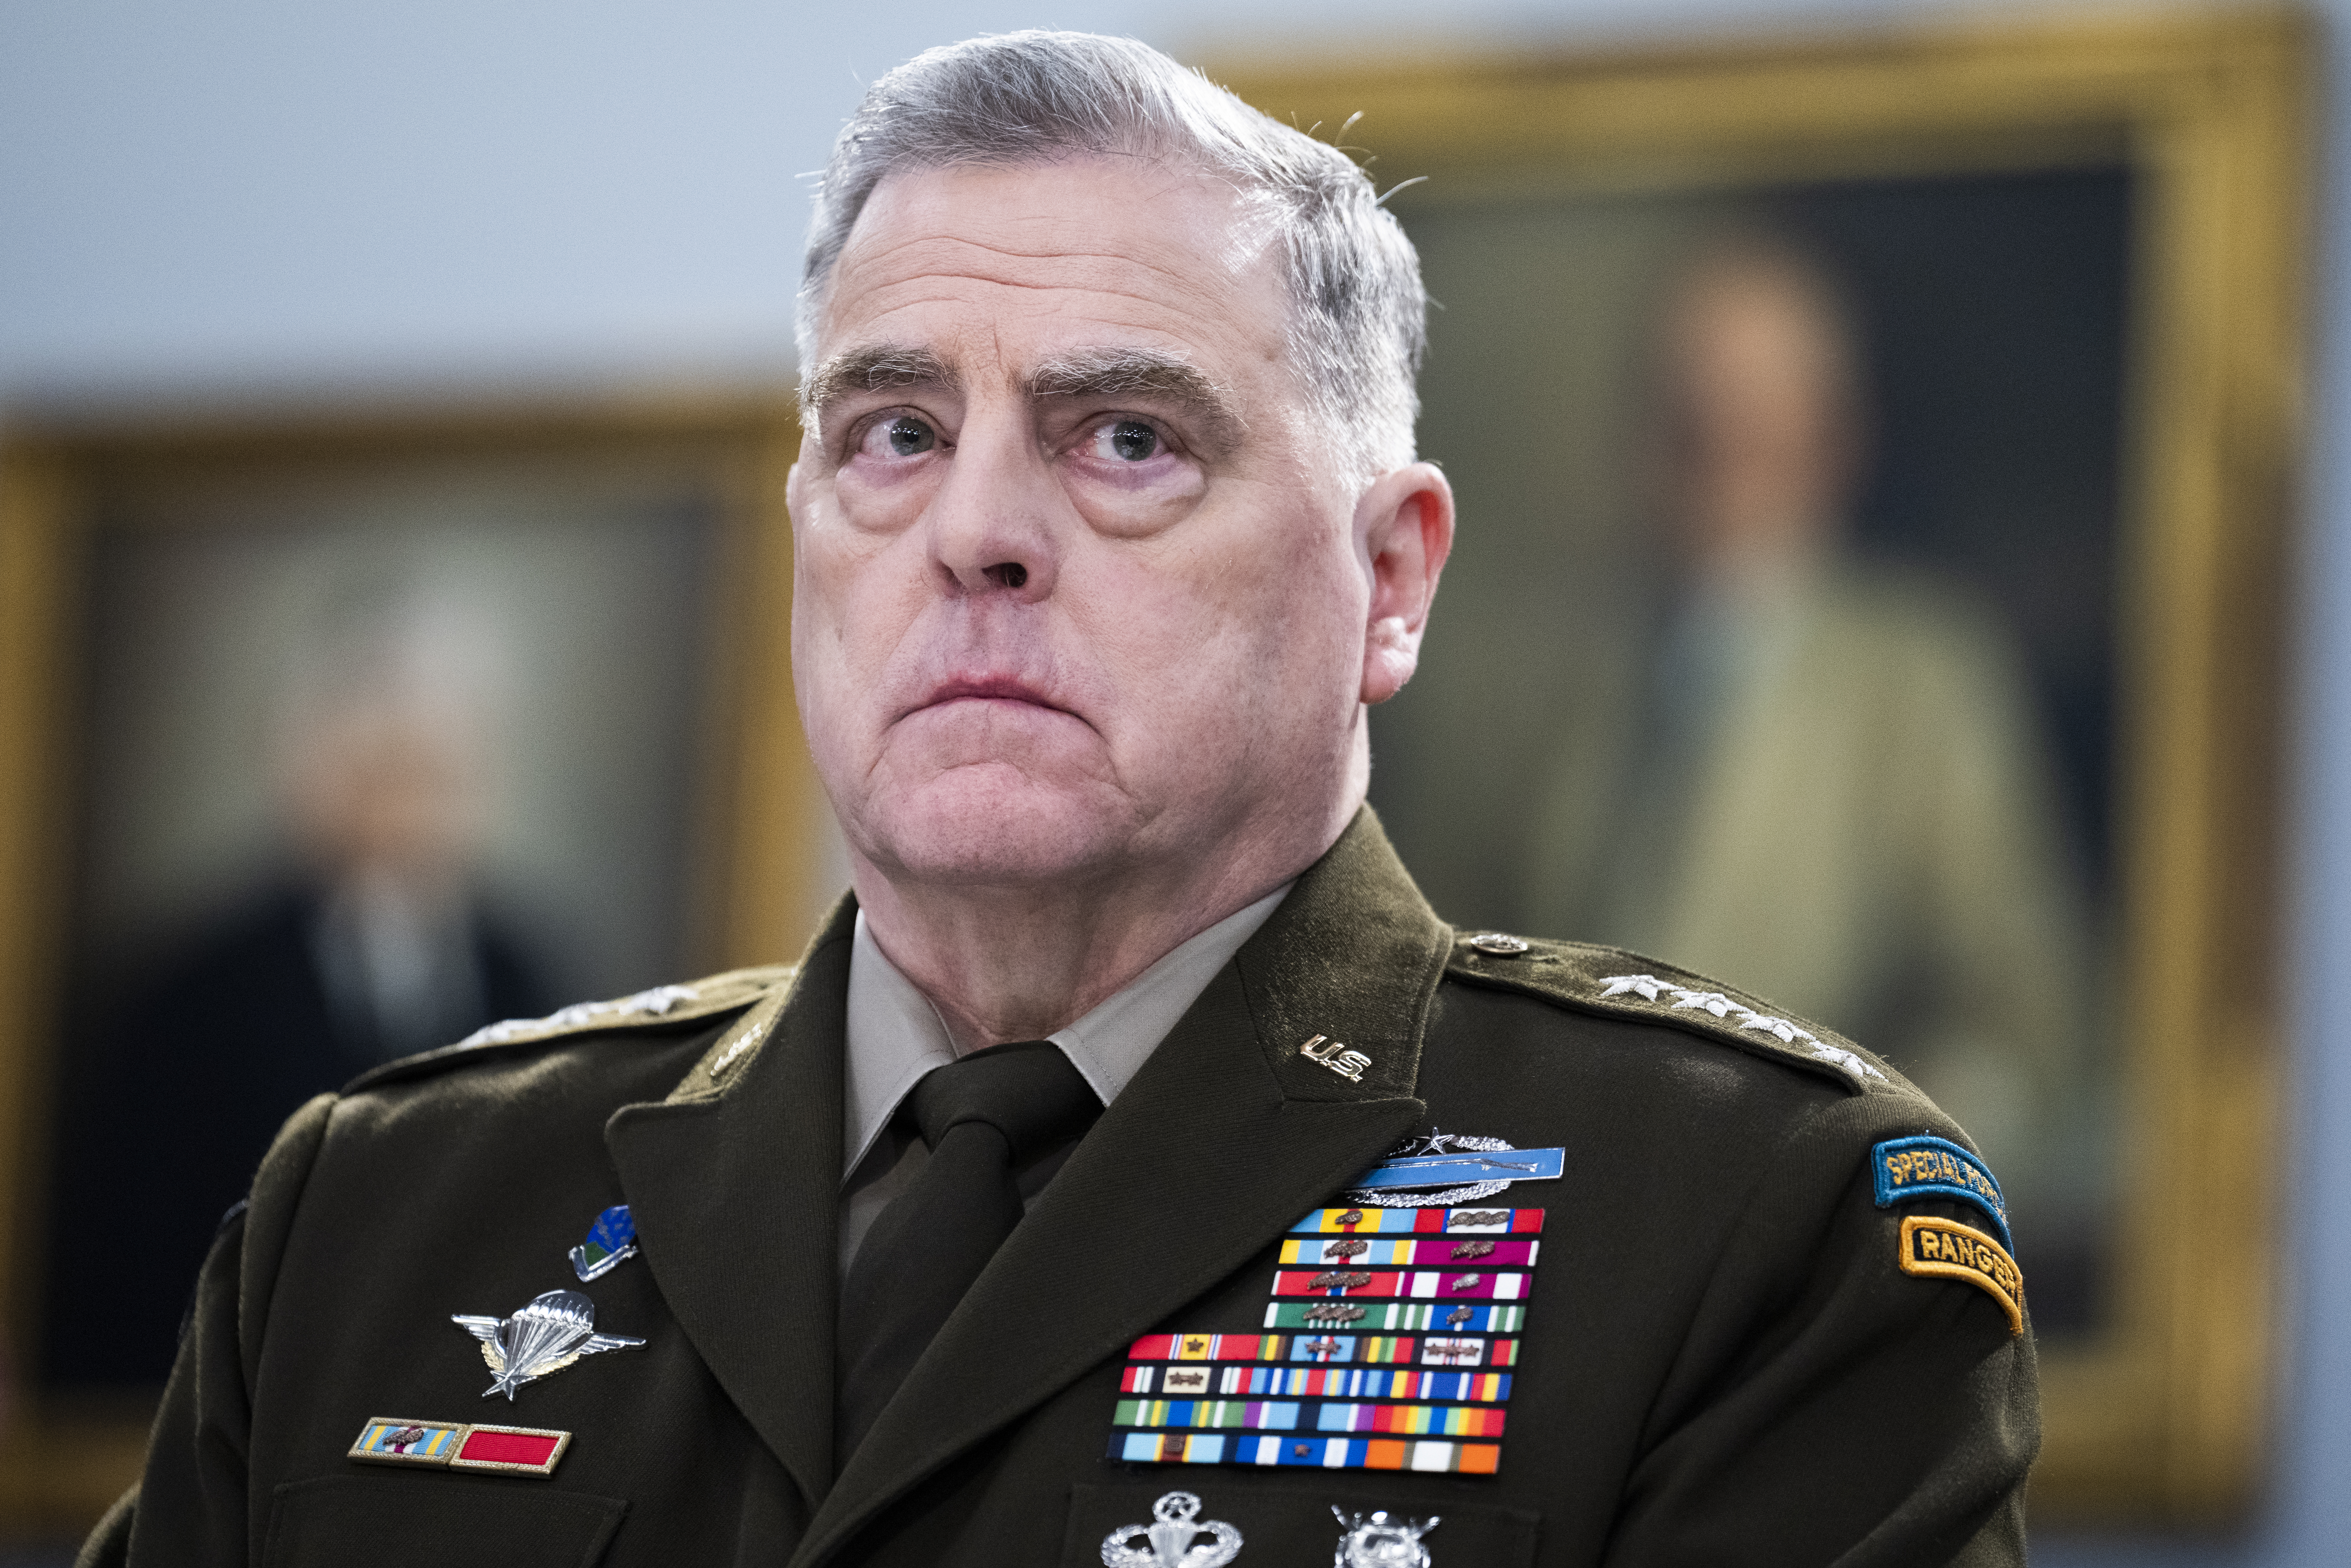 General Mark Milley wears a serious expression, dressed in military uniform with colorful medals and pins.